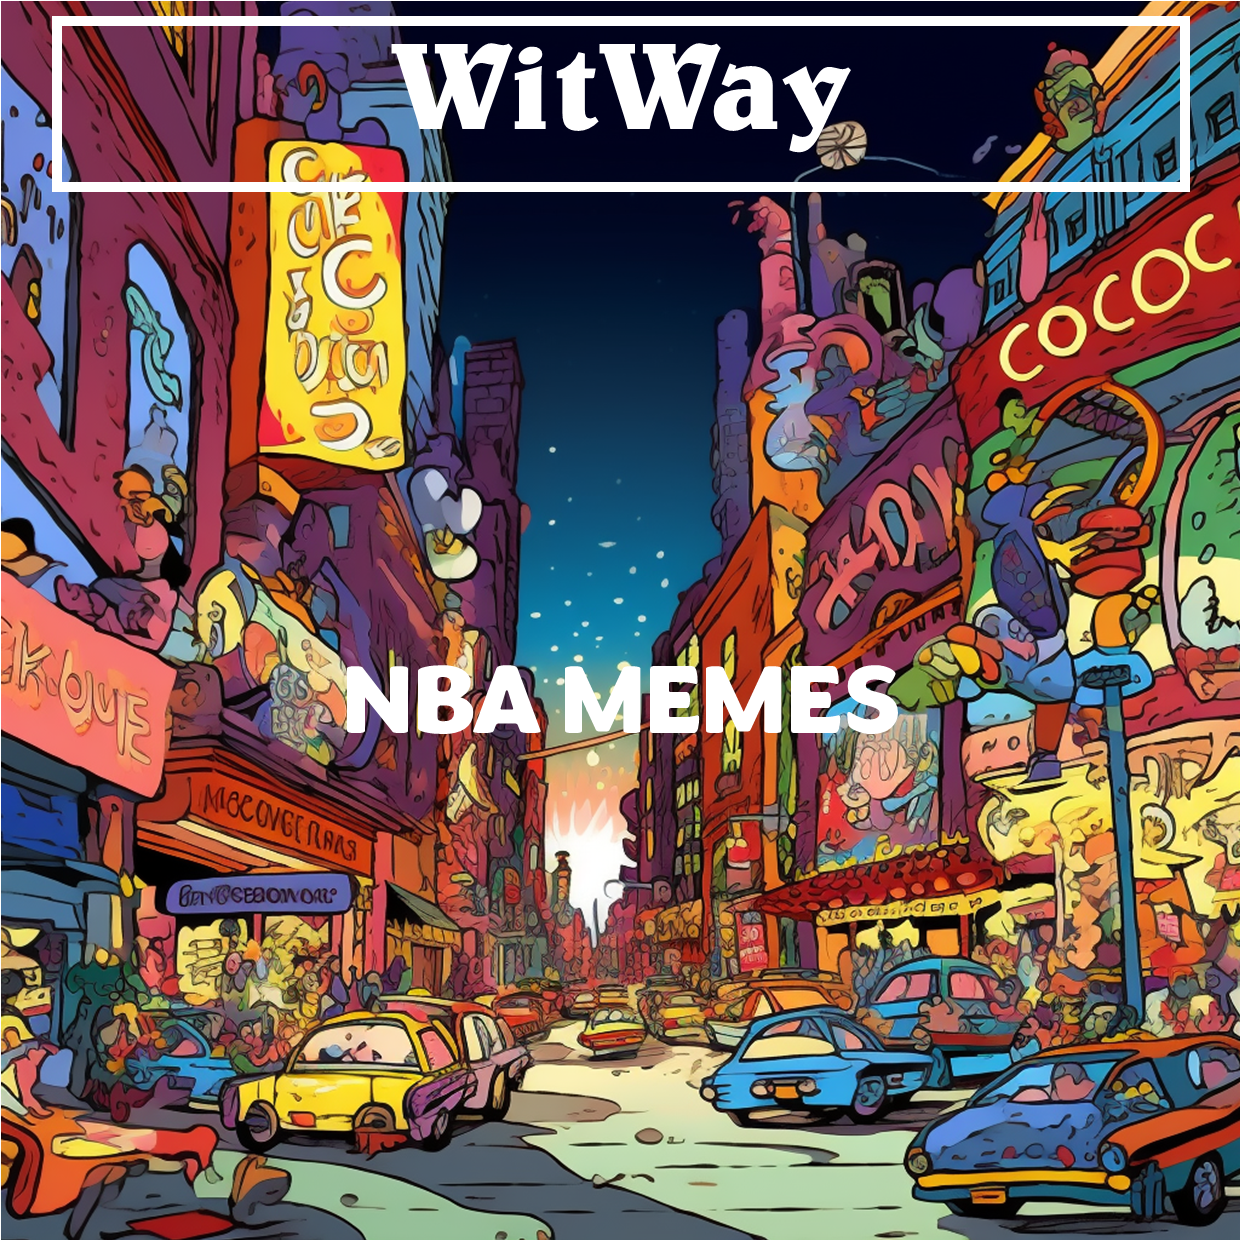 NBA Memes #NBAMemes #witway Profile Picture